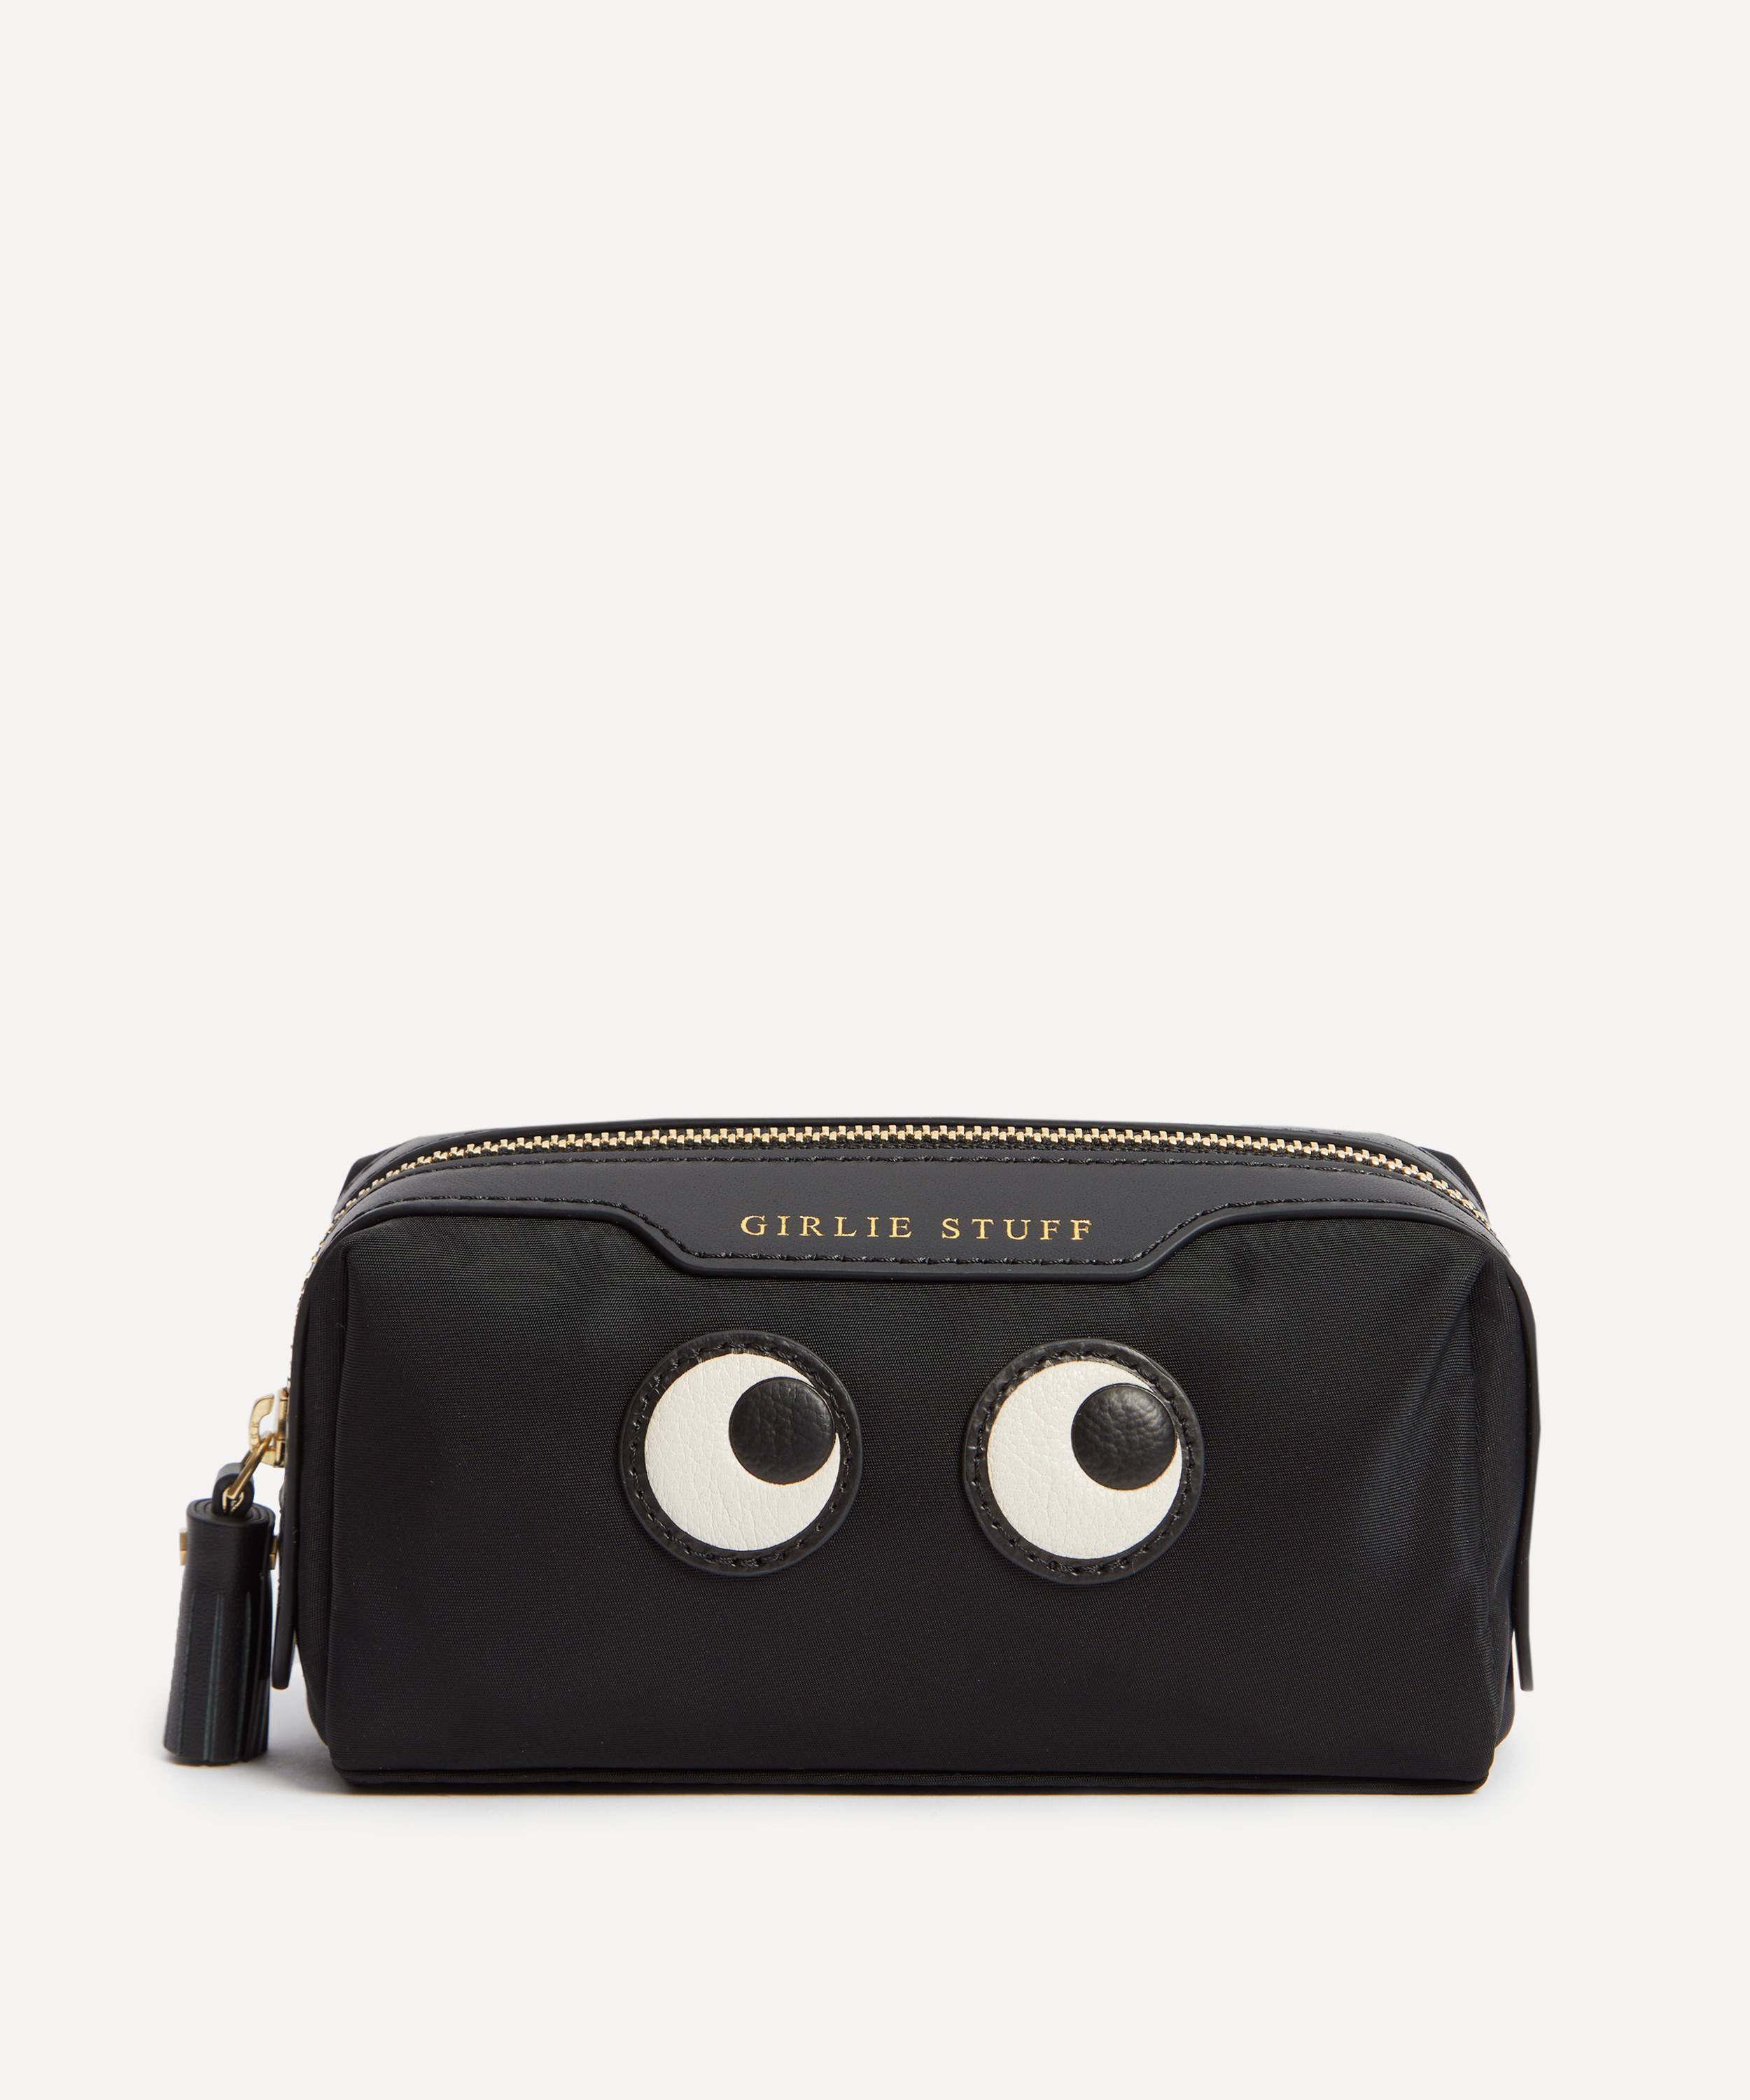 Anya Hindmarch - Eyes Girlie Stuff Pouch